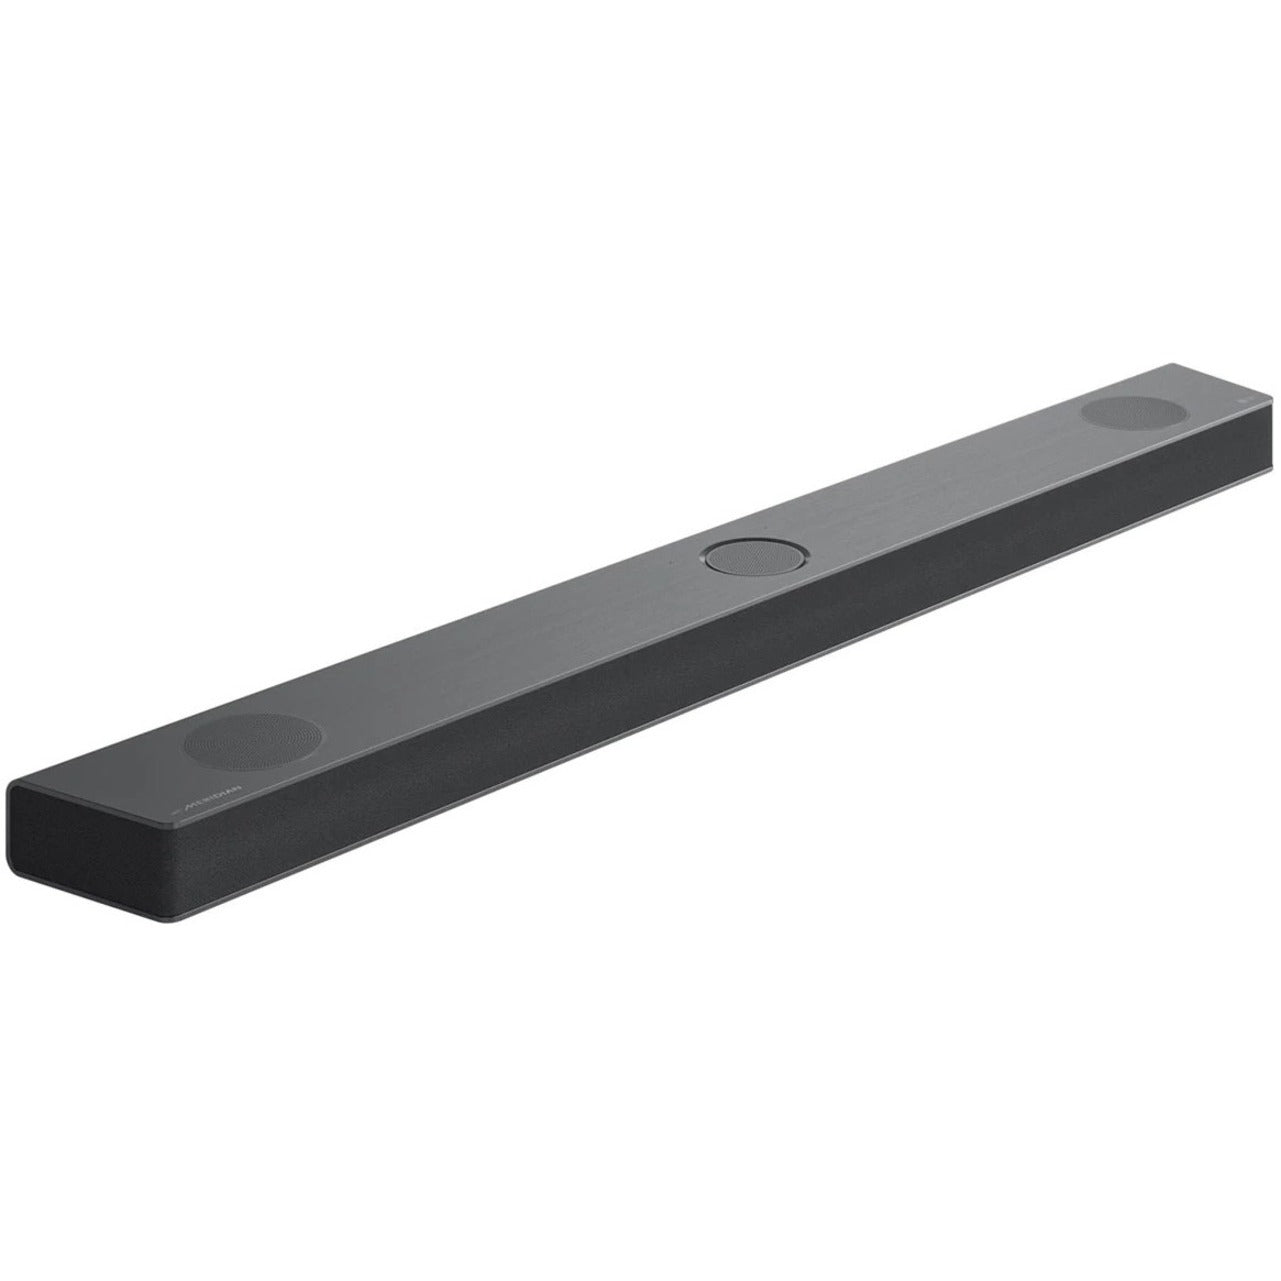 LG S95QR Sound Bar Speaker, 9.1.5 Channel with Wireless Subwoofer, Dolby Atmos and DTS:X, Black